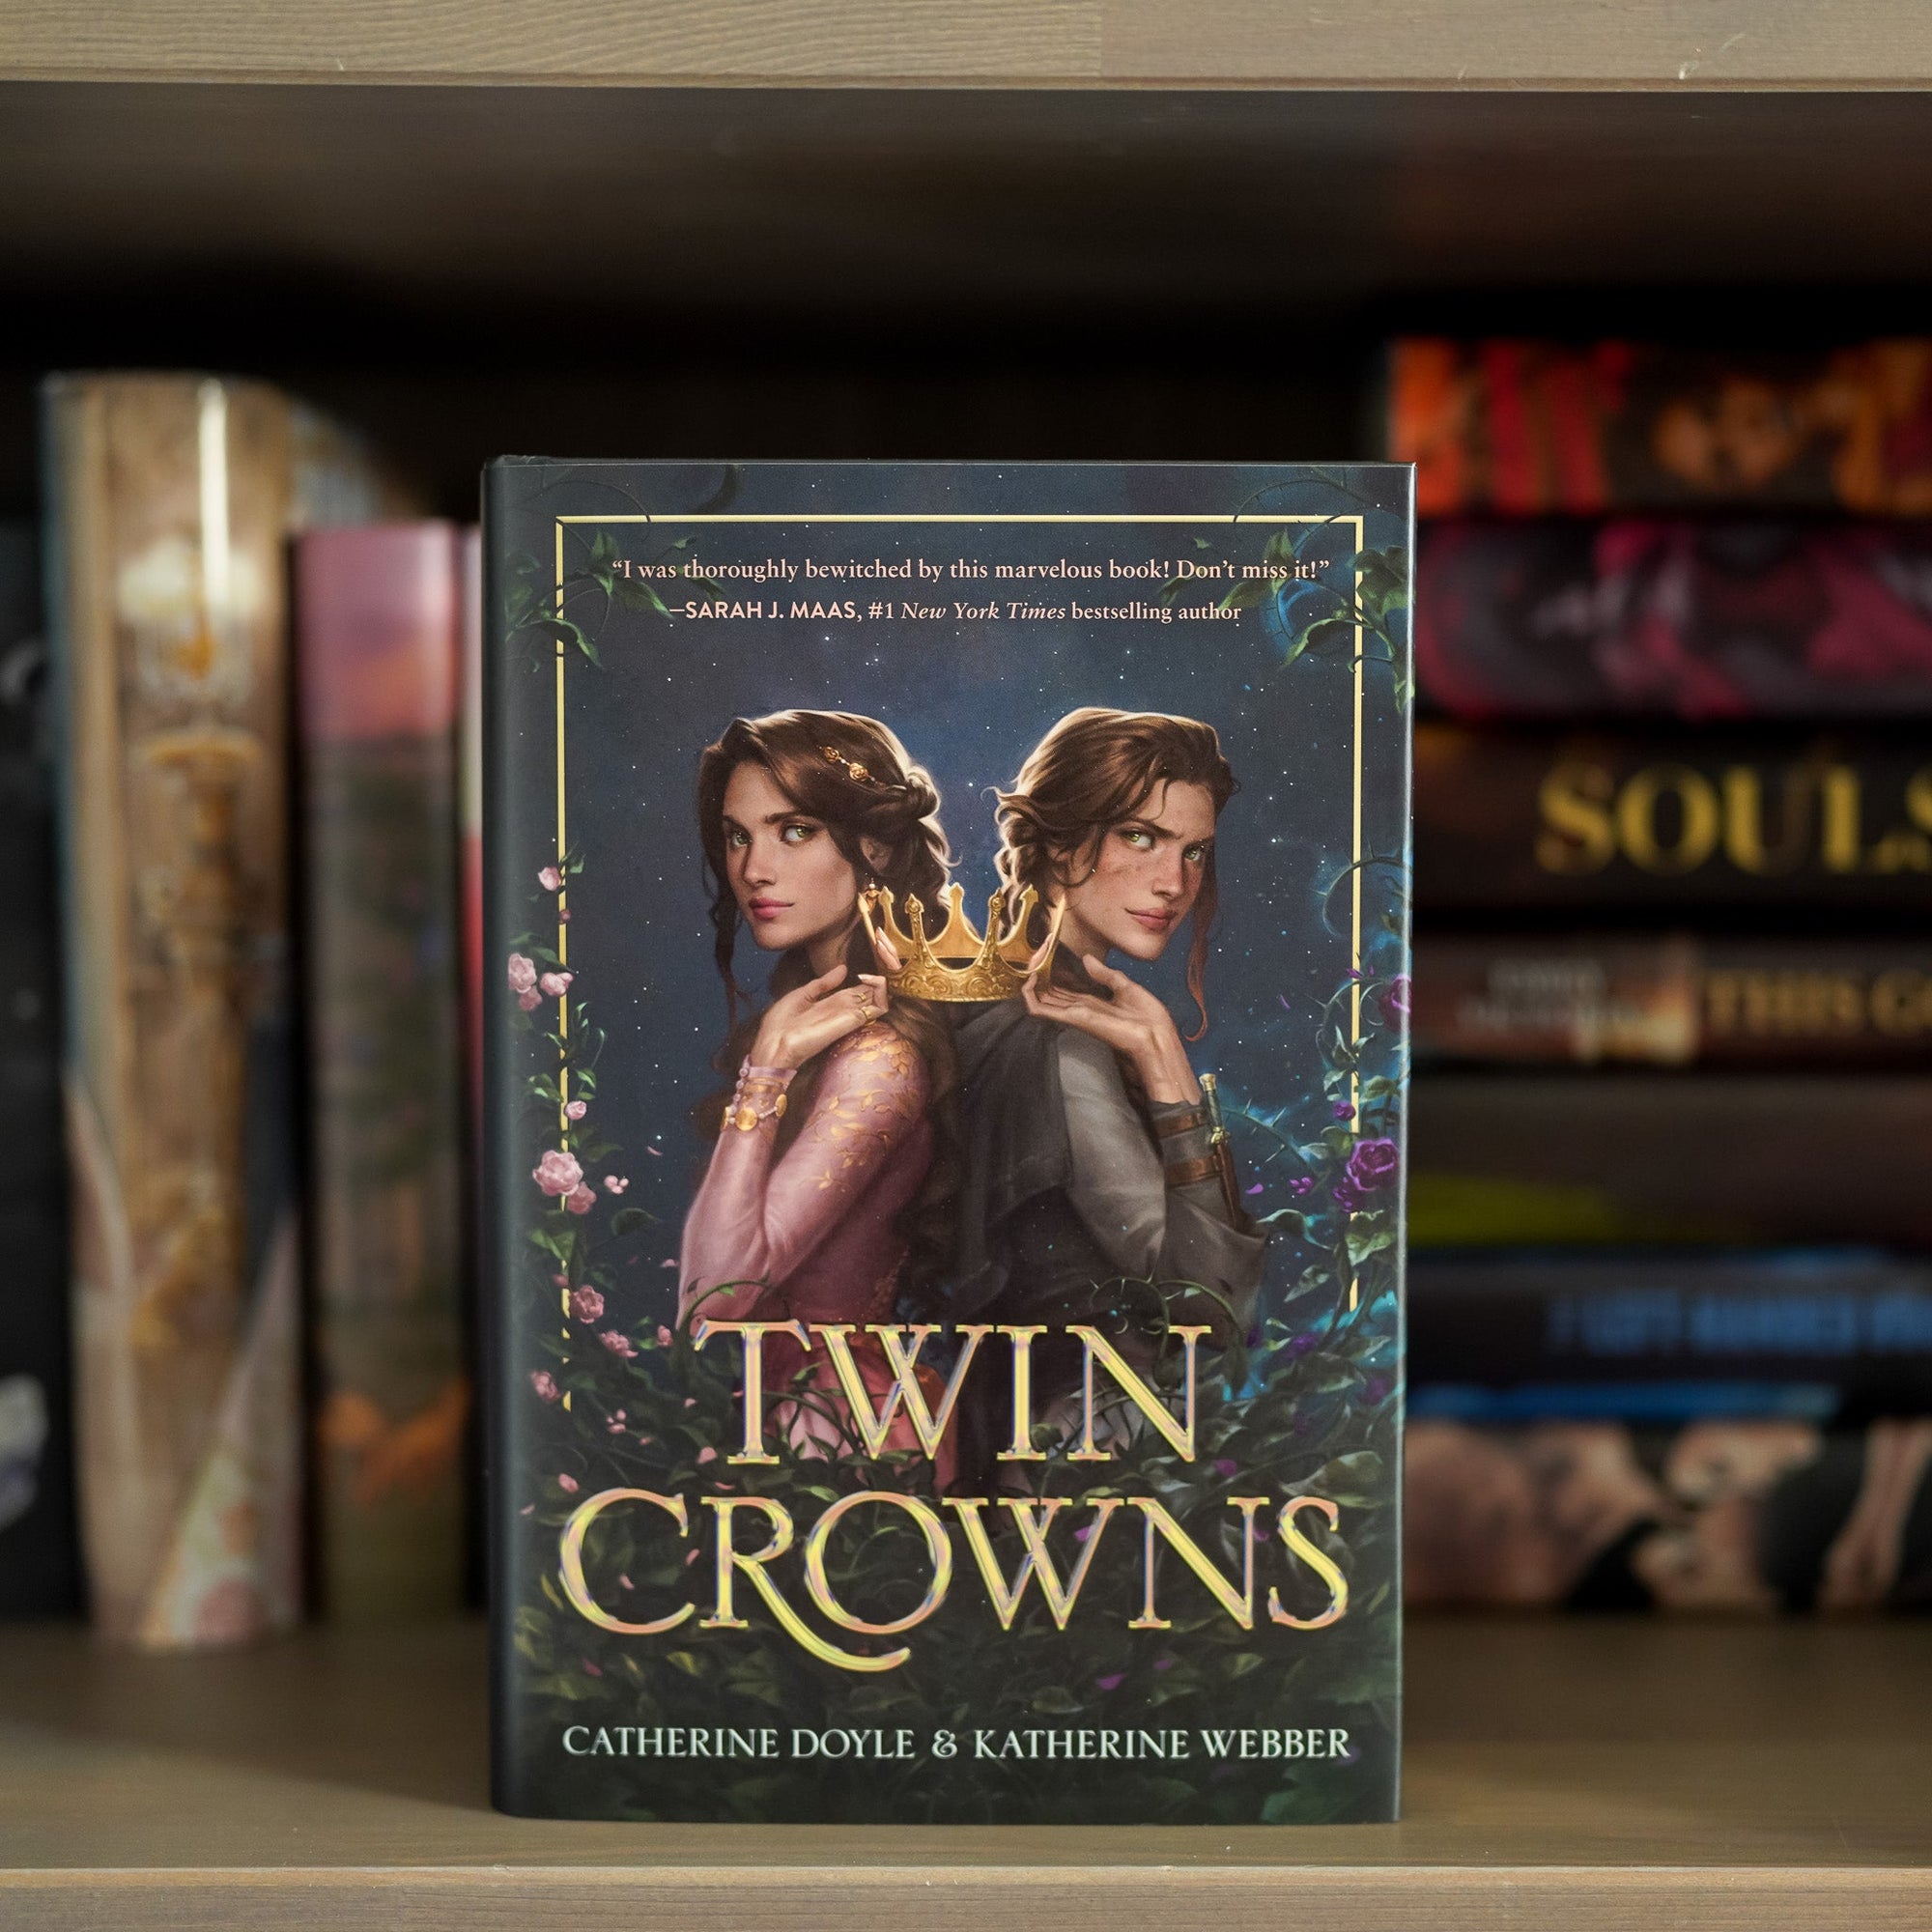 Twin Crowns by Catherine Doyle and Katherine Webber